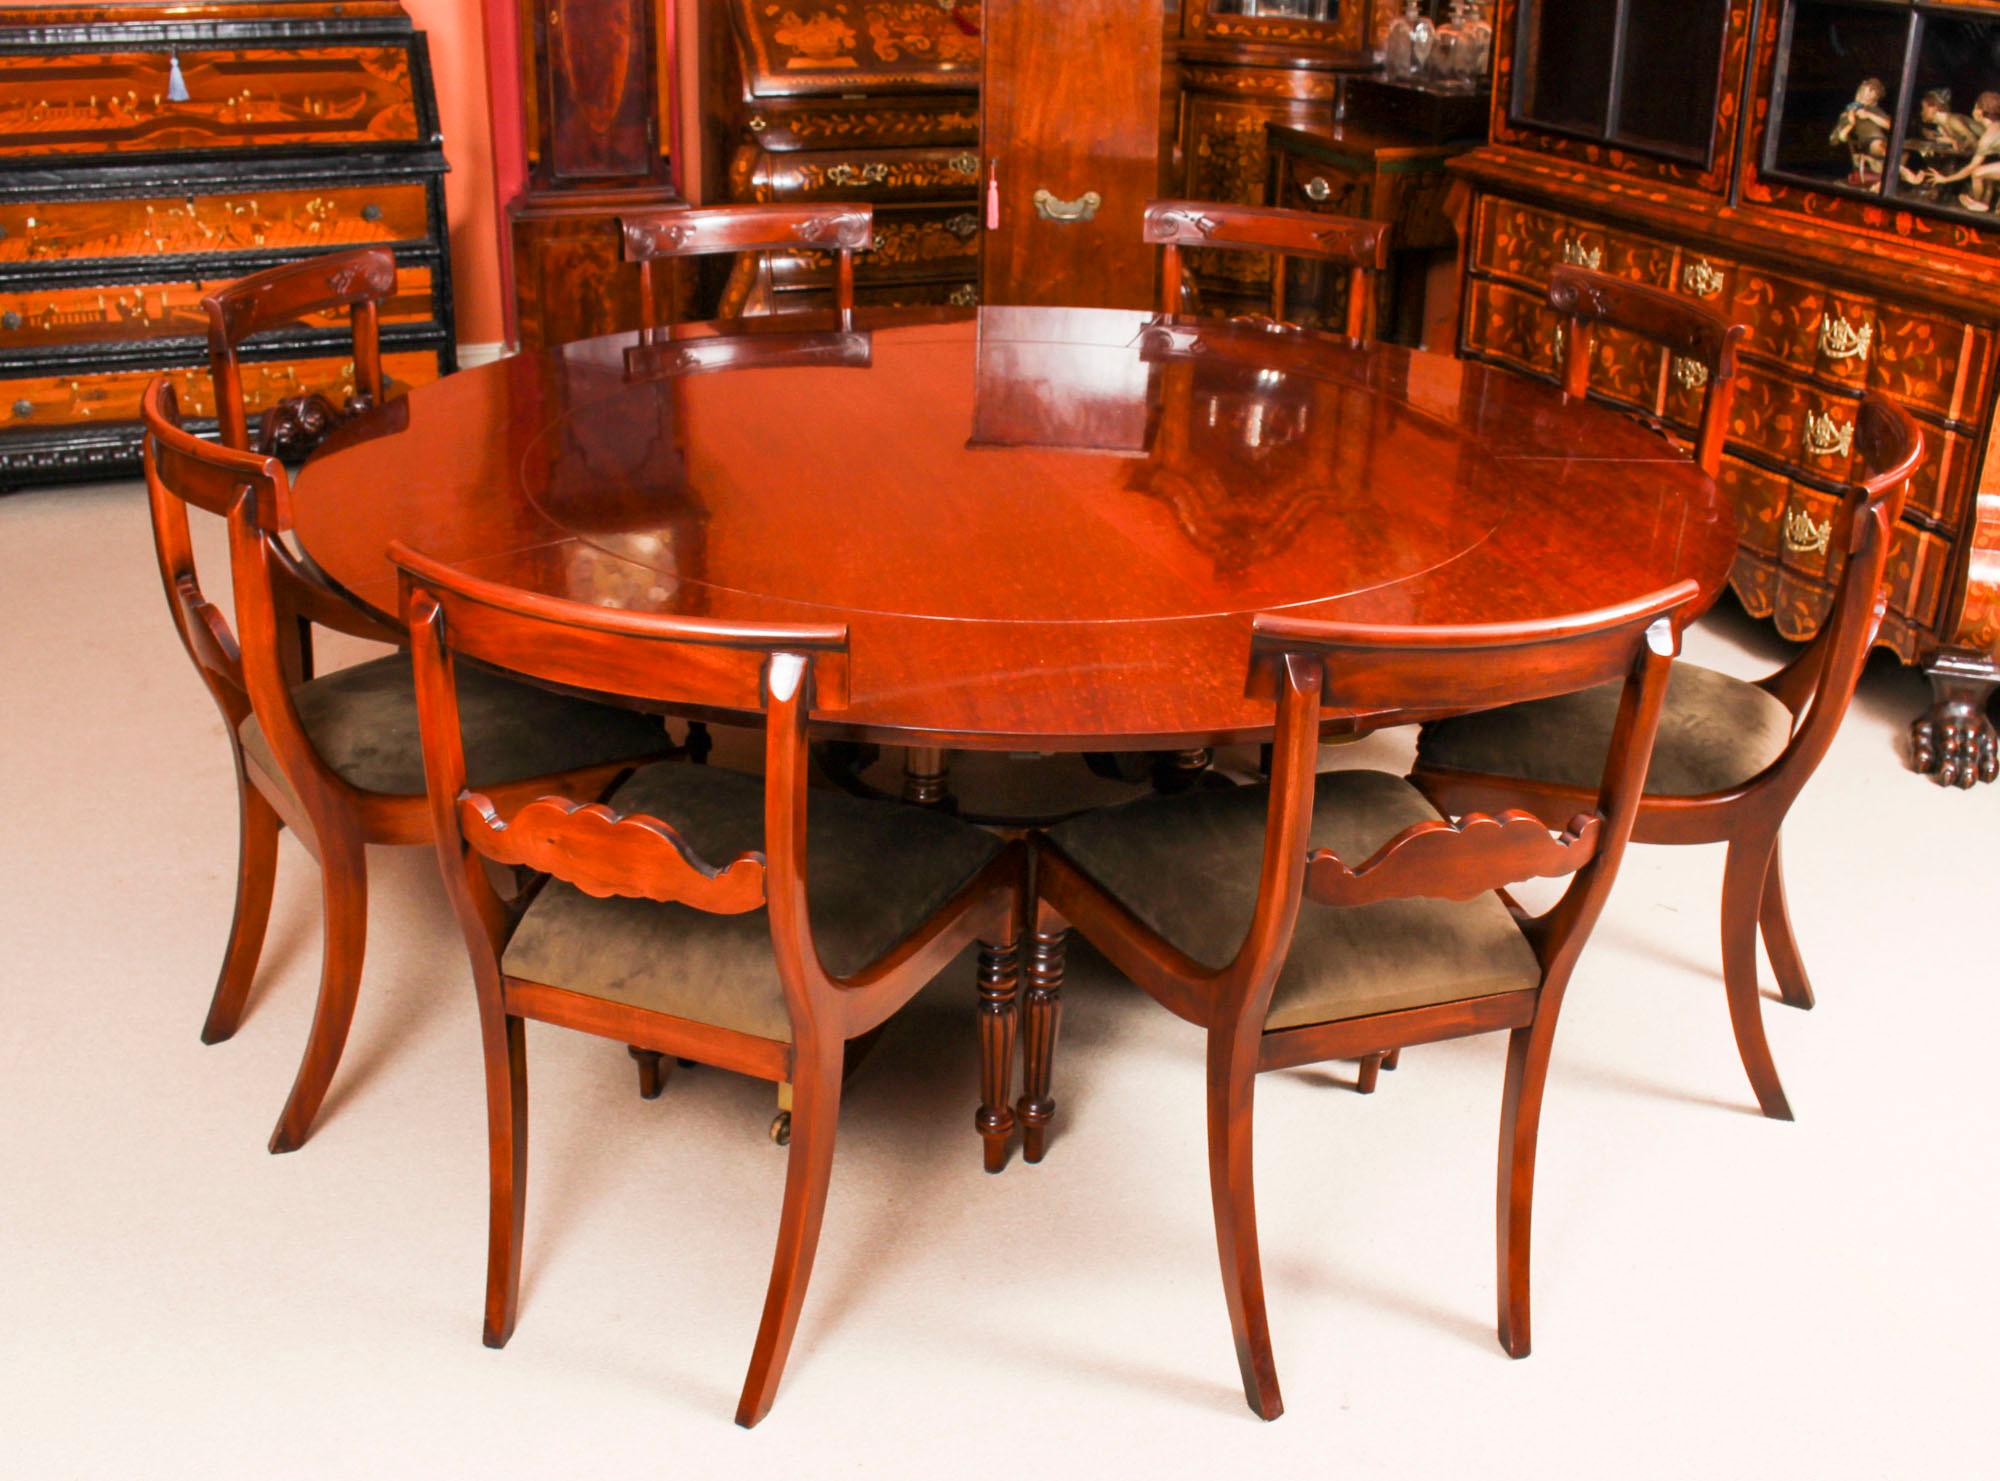 This beautiful dining set comprises a Regency Revival Jupe style dining table mid-20th century in date, with a matching set of eight bespoke Regency style dining chairs.

The table has a solid mahogany top with a reeded edge that has five